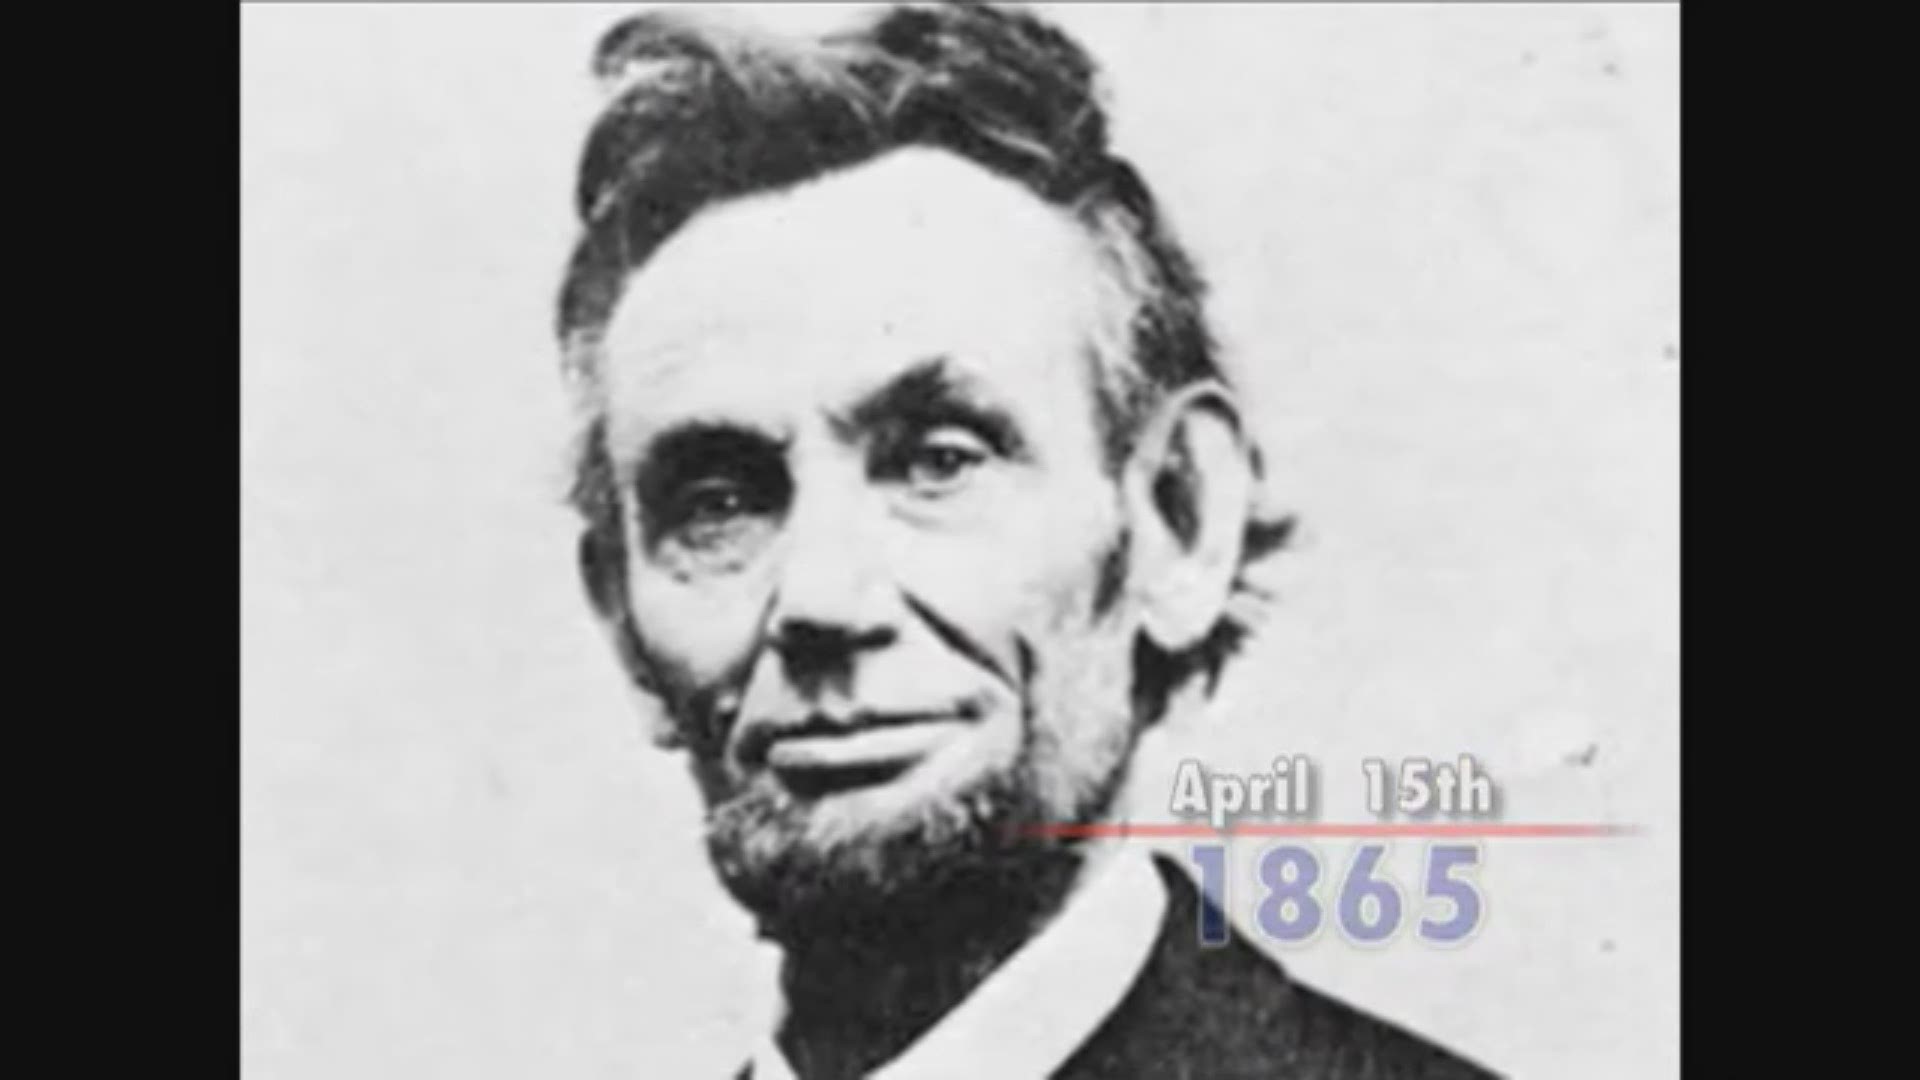 April 15 is the anniversary of the Titanic sinking and the death of Abraham Lincoln.